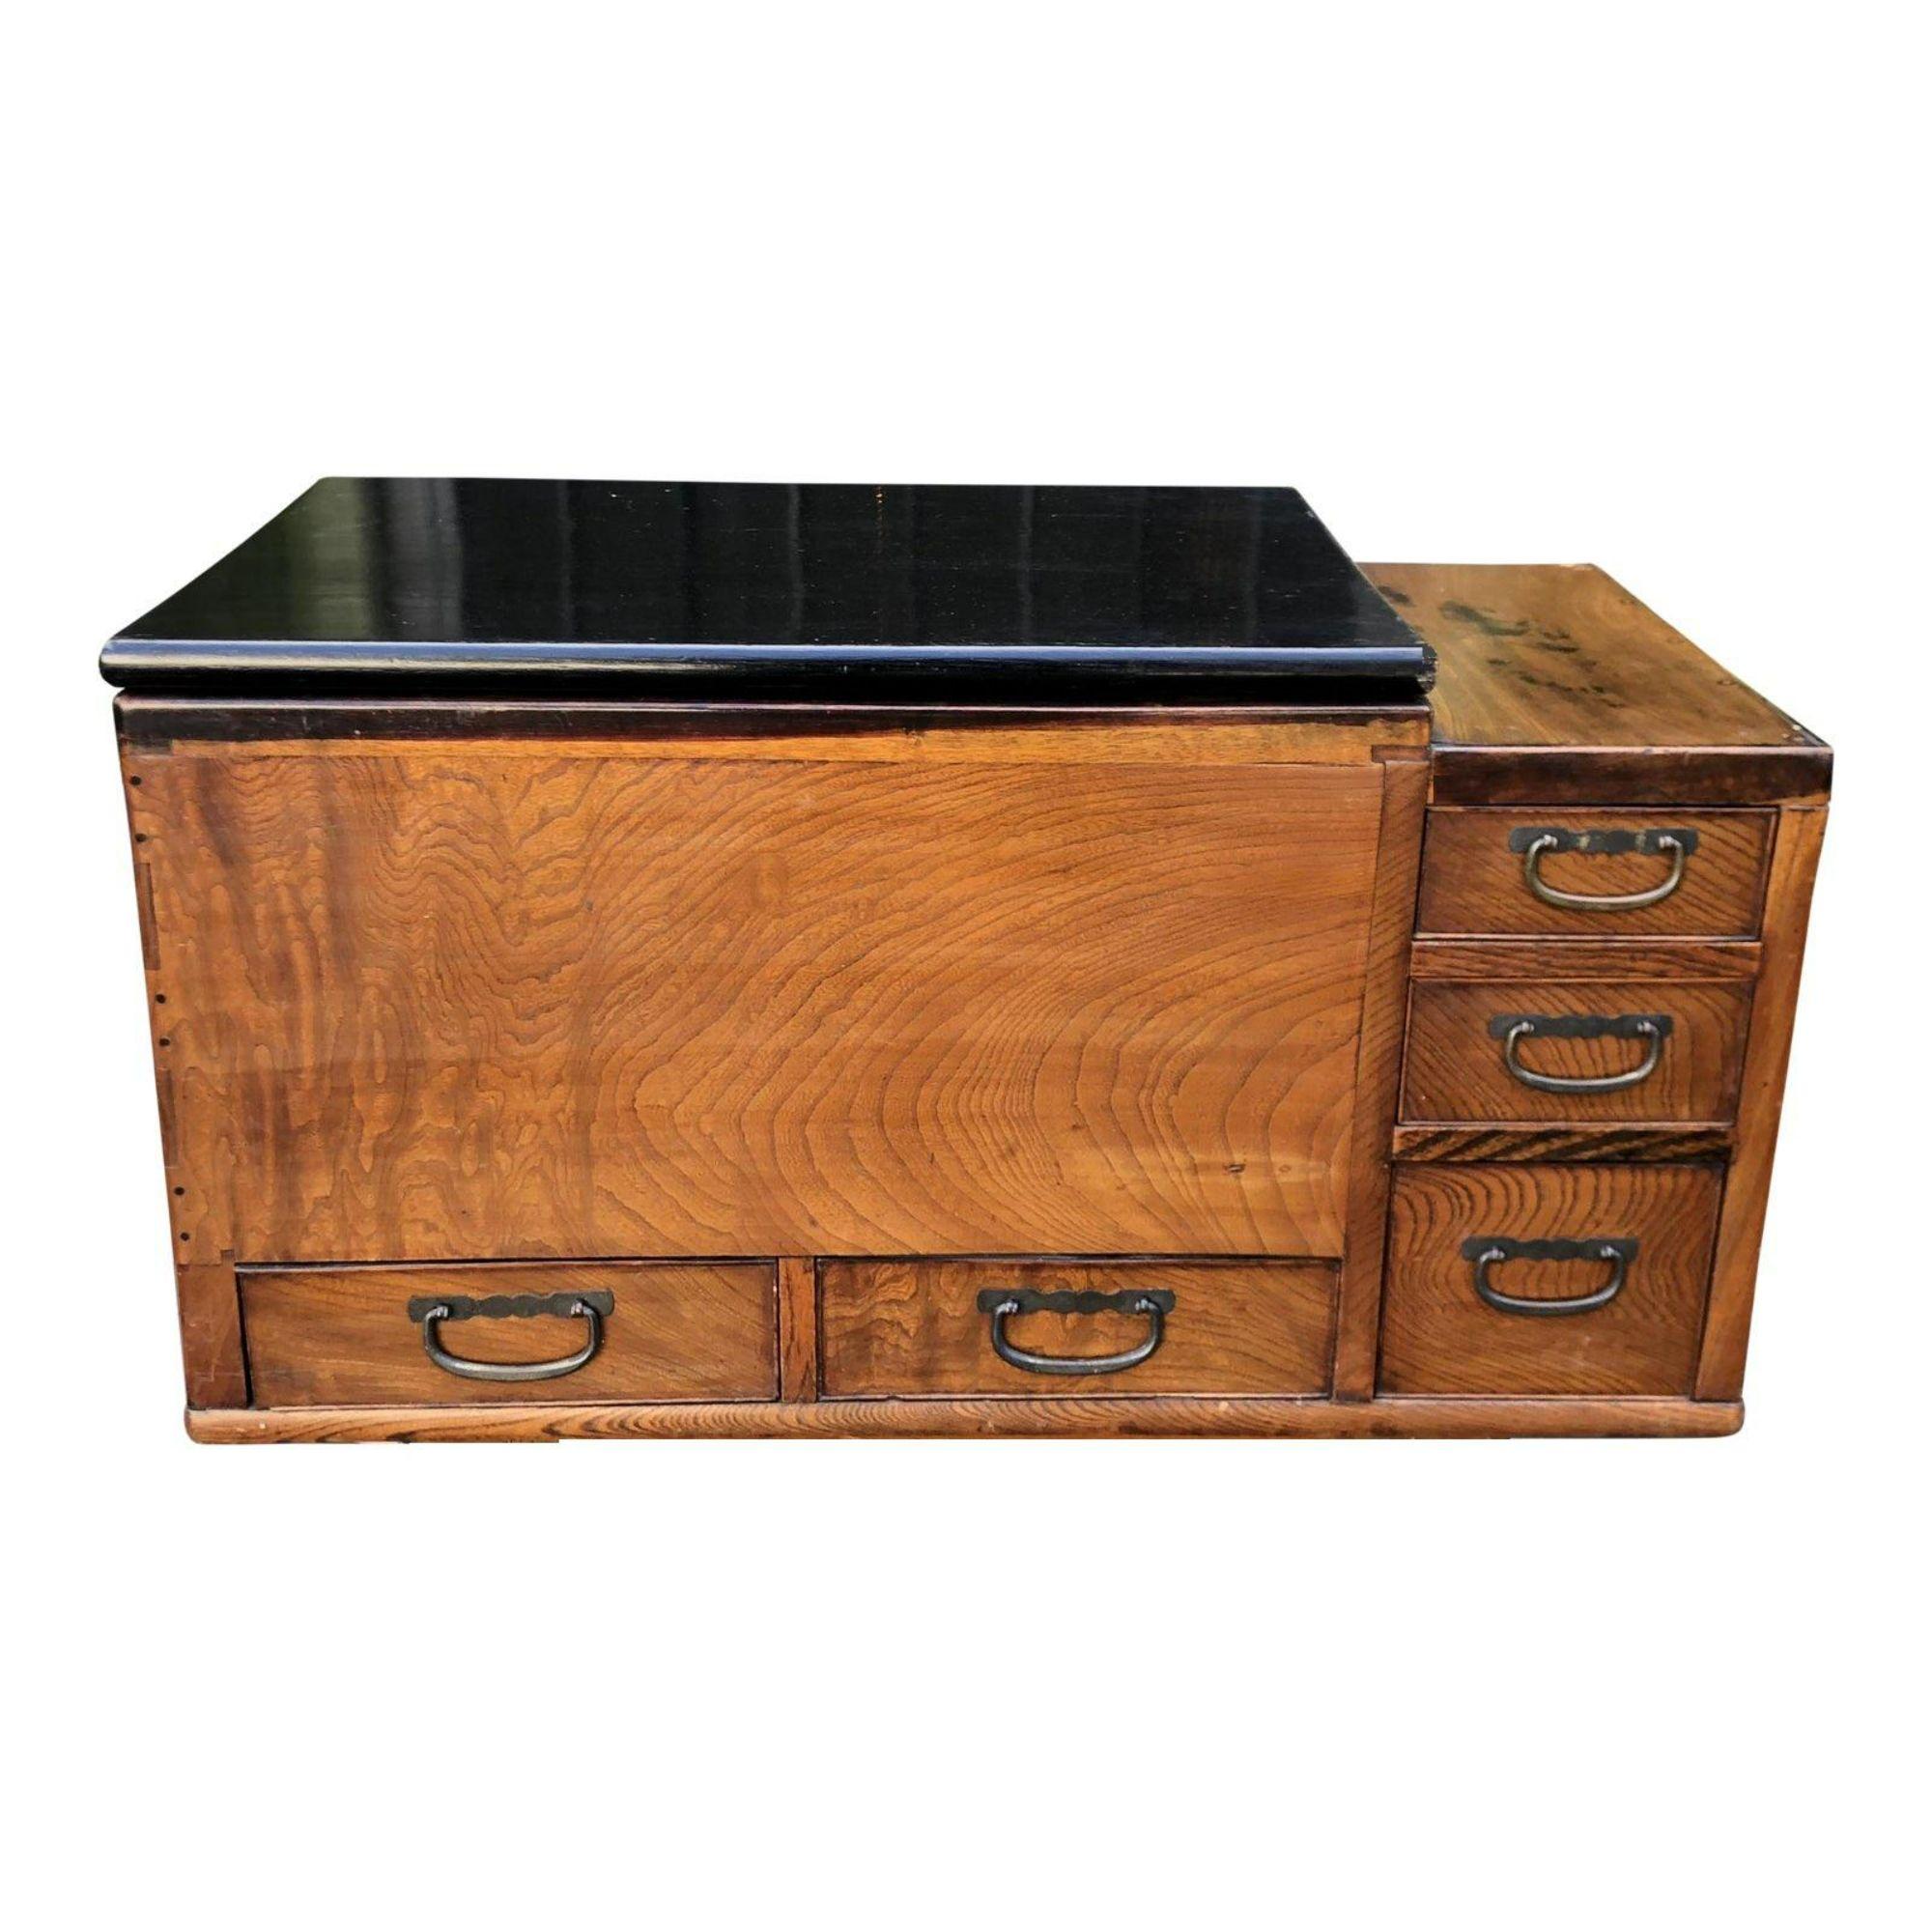 Antique Japanese five drawer copper lined Hibachi, circa 1870

Additional information: 
Materials: copper, wood
Color: ebony
Period: 19th century
Place of origin: Japan
Styles: Japanese
Item type: vintage, antique or pre-owned
Dimensions: